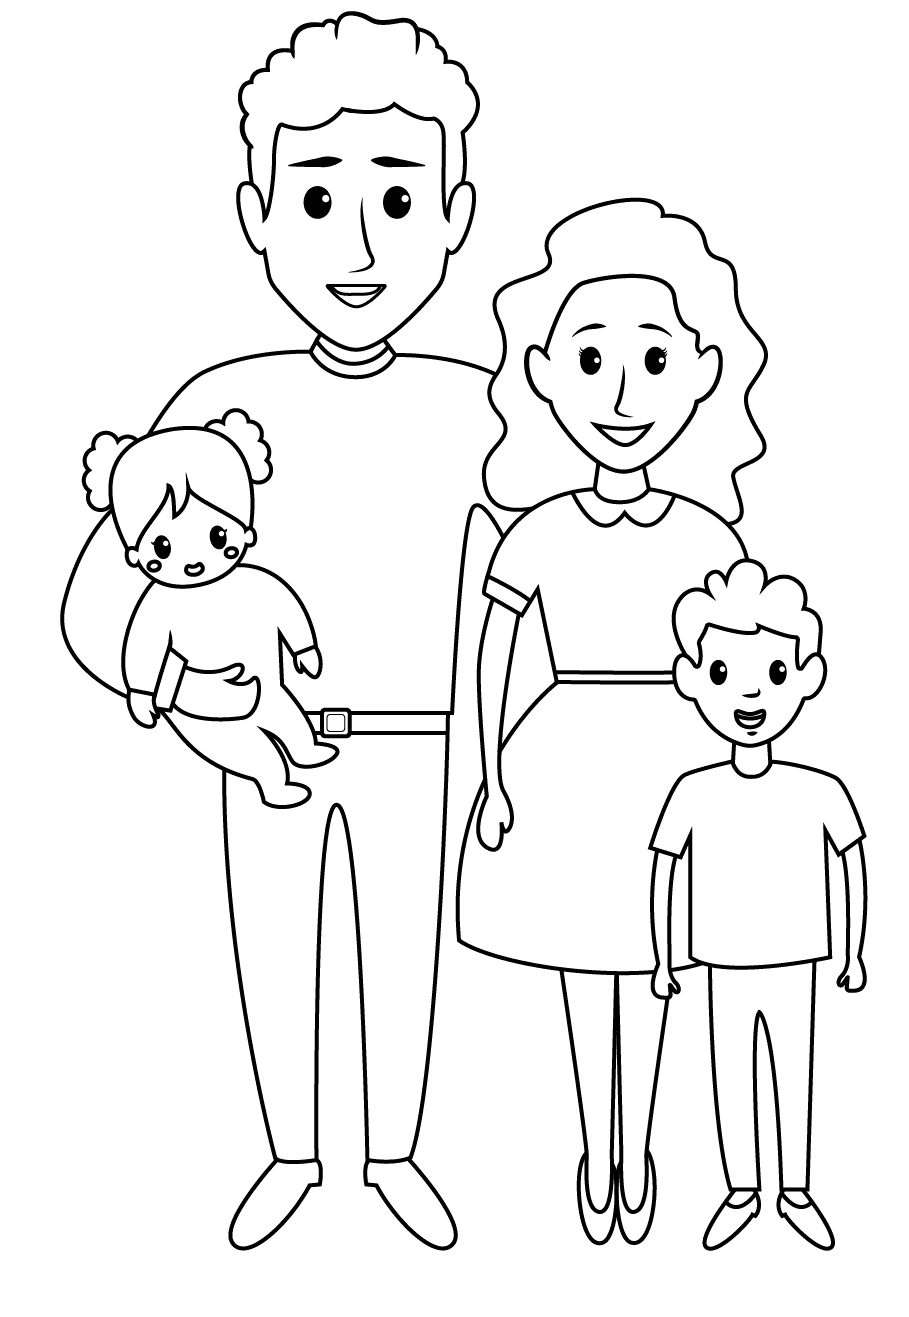 Parents and Two Children Coloring Page